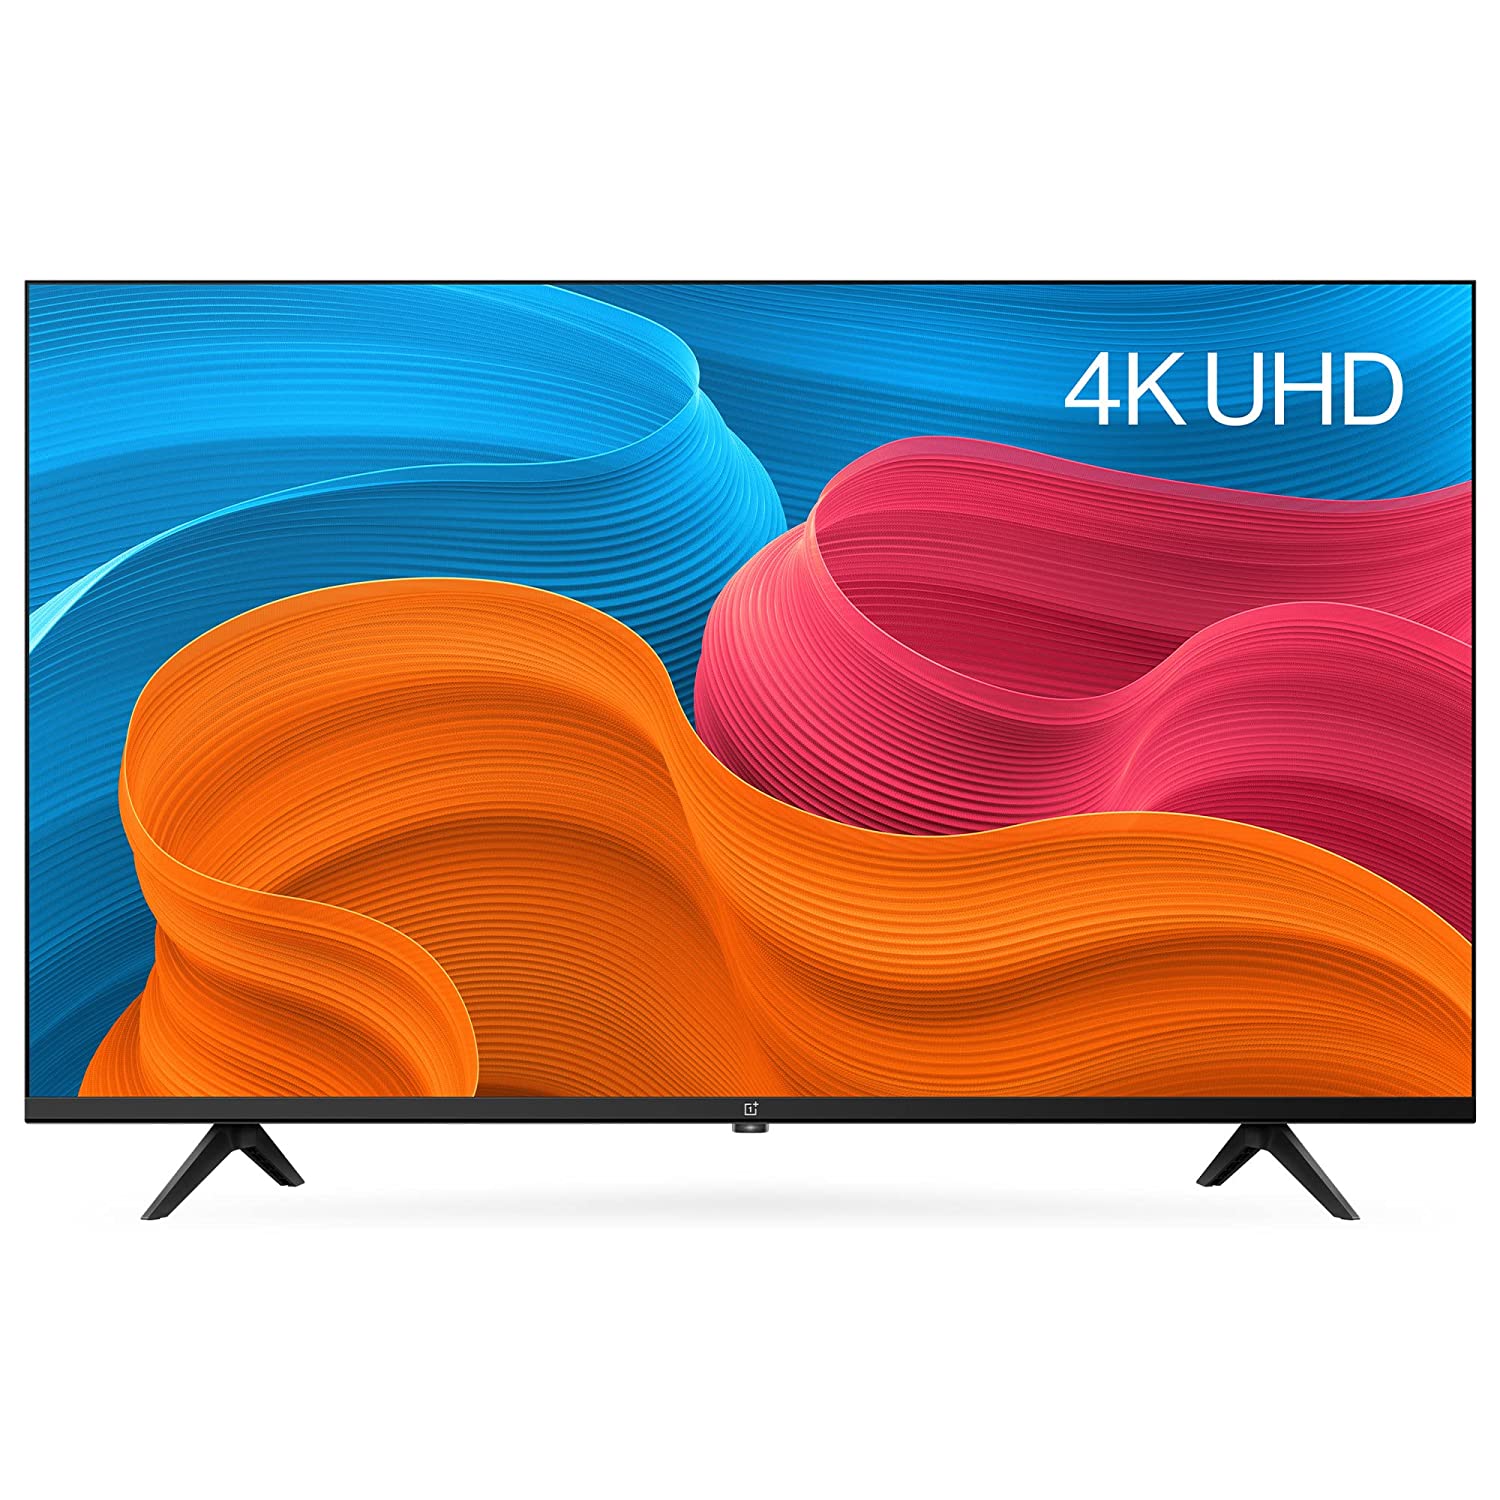 OnePlus 43 inches Y Series 4K Ultra HD LED TV